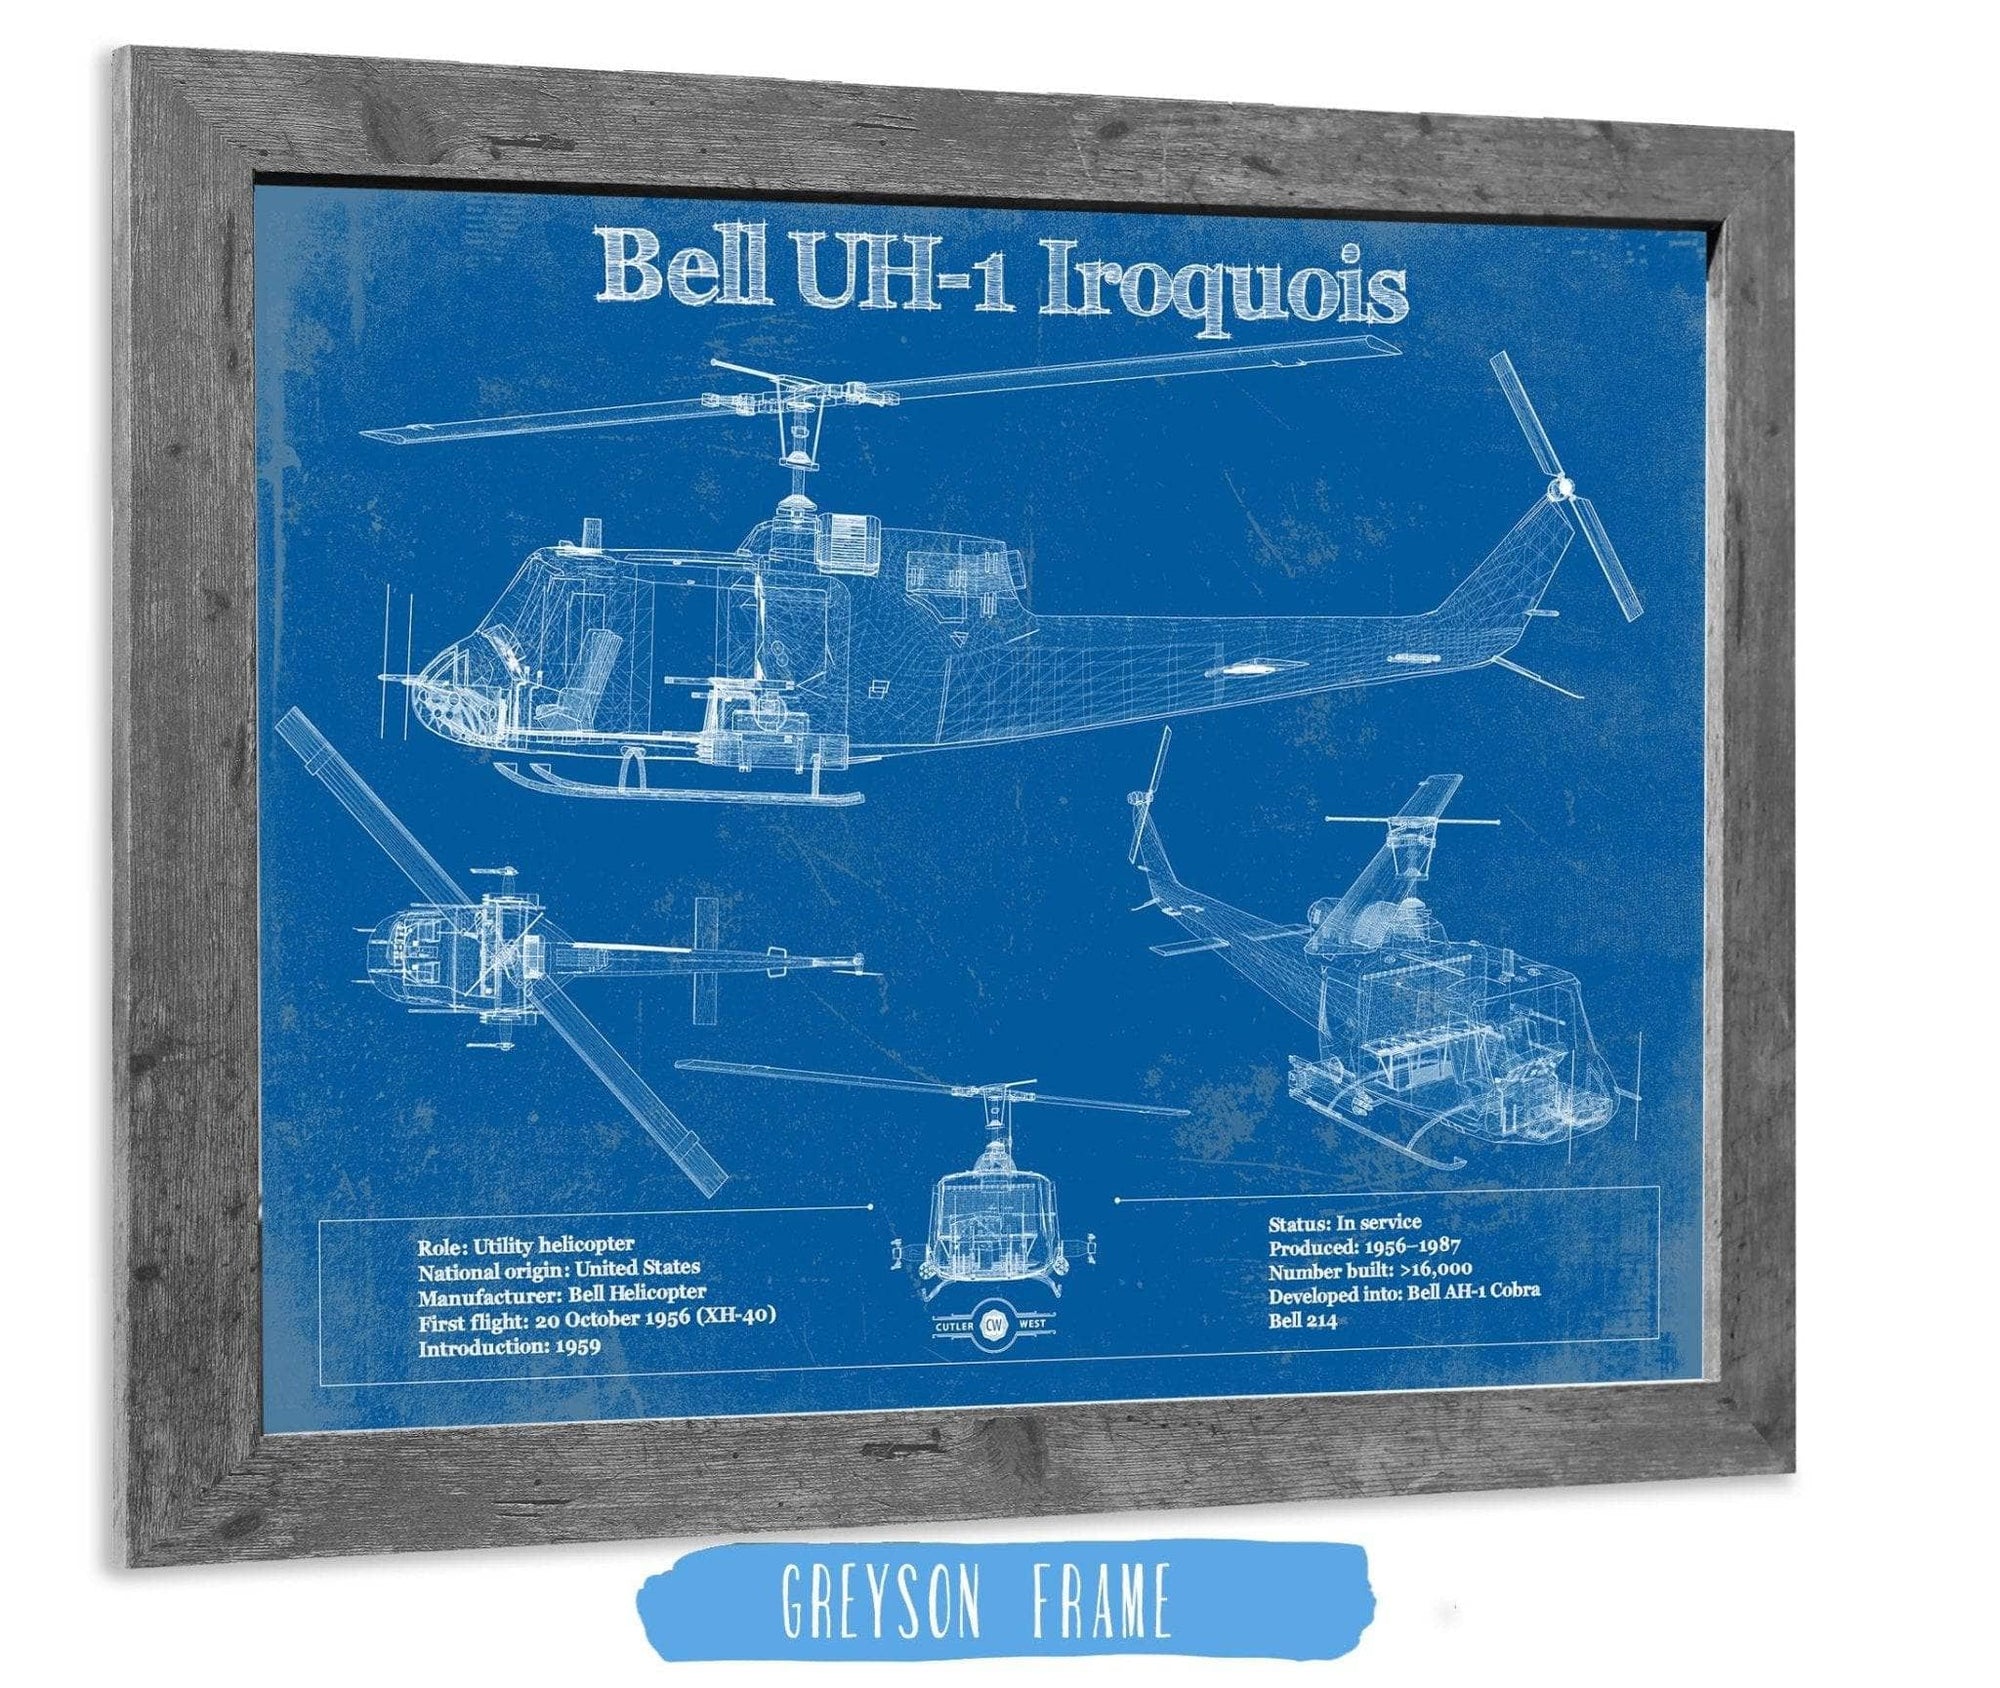 Cutler West Military Aircraft 14" x 11" / Greyson Frame Bell UH-1 Iroquois (Huey) Vintage Blueprint Helicopter Print 833110167_35346